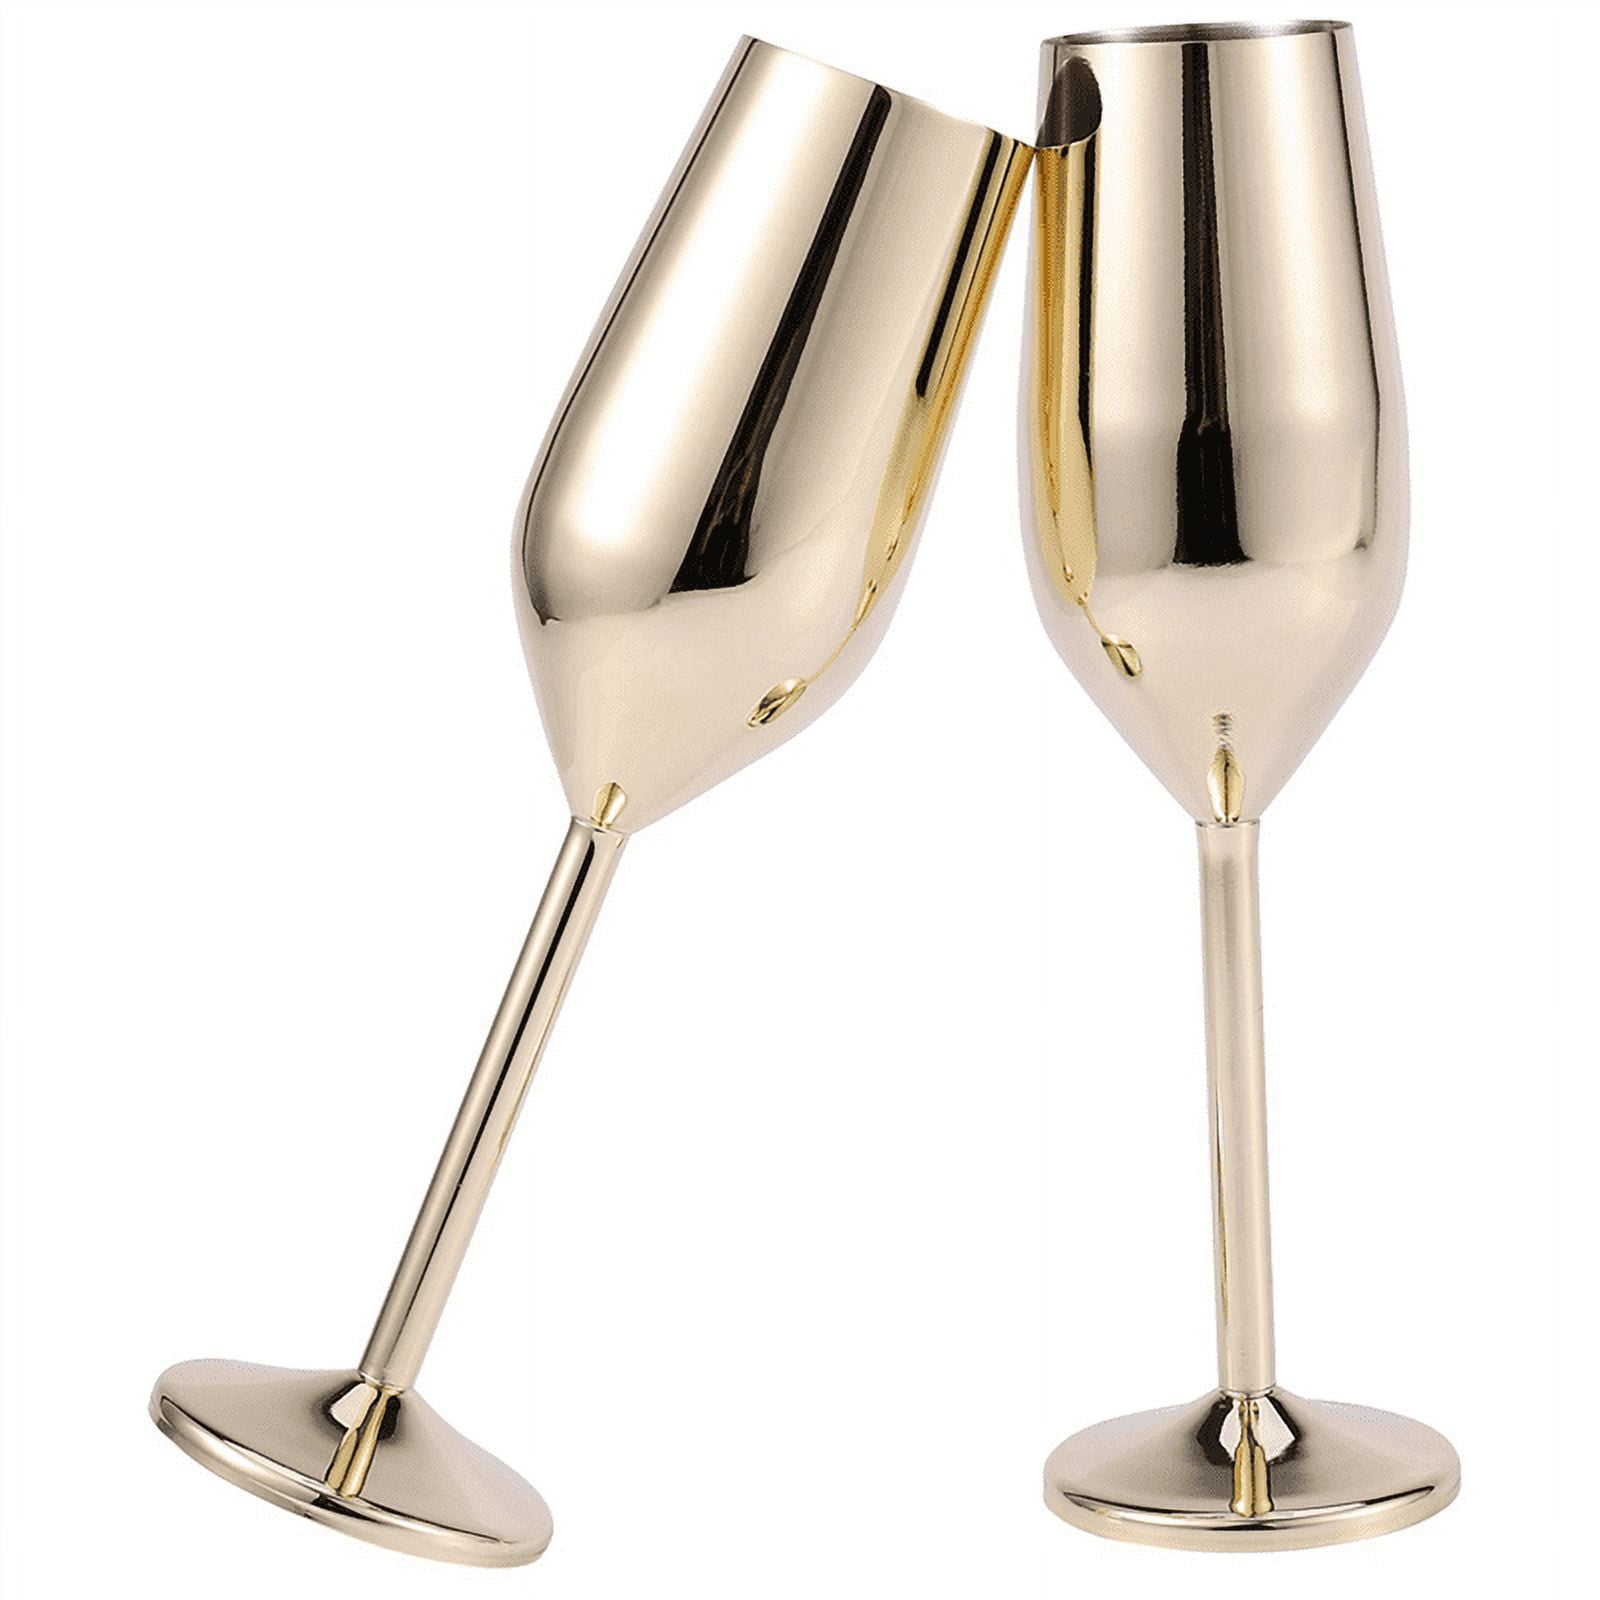 Stainless Steel Champagne Flute / Barware and Drinkware / Holden Promo